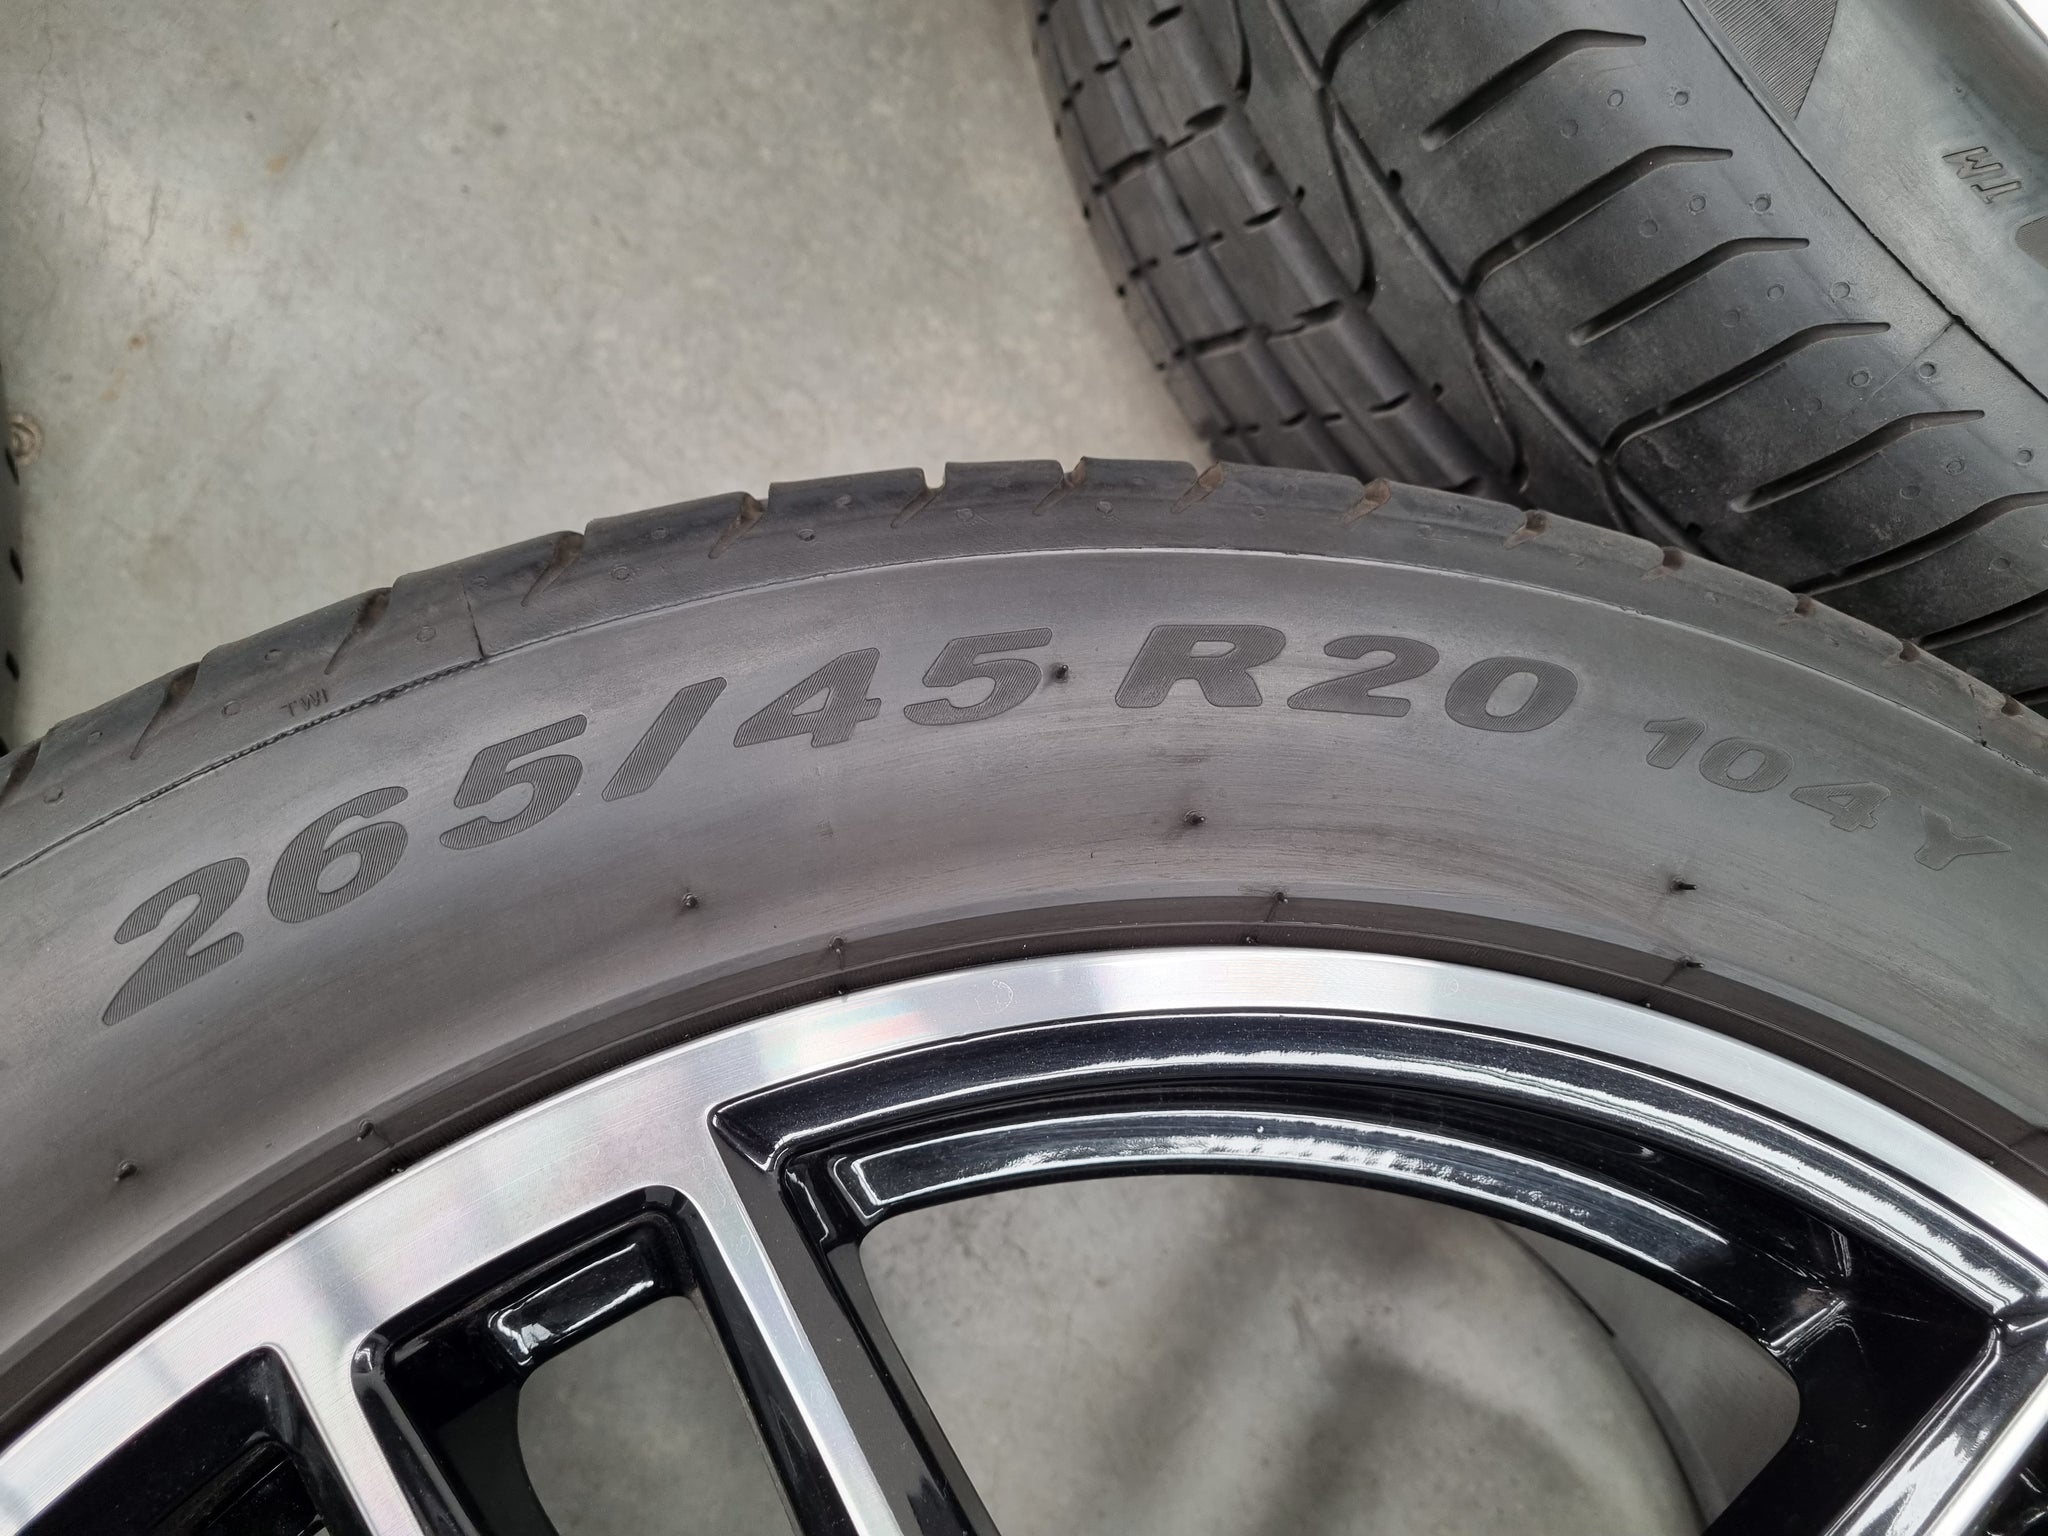 Load image into Gallery viewer, Genuine Porsche Macan 2021 Model 20 Inch Wheels and Tyres Set of 4
